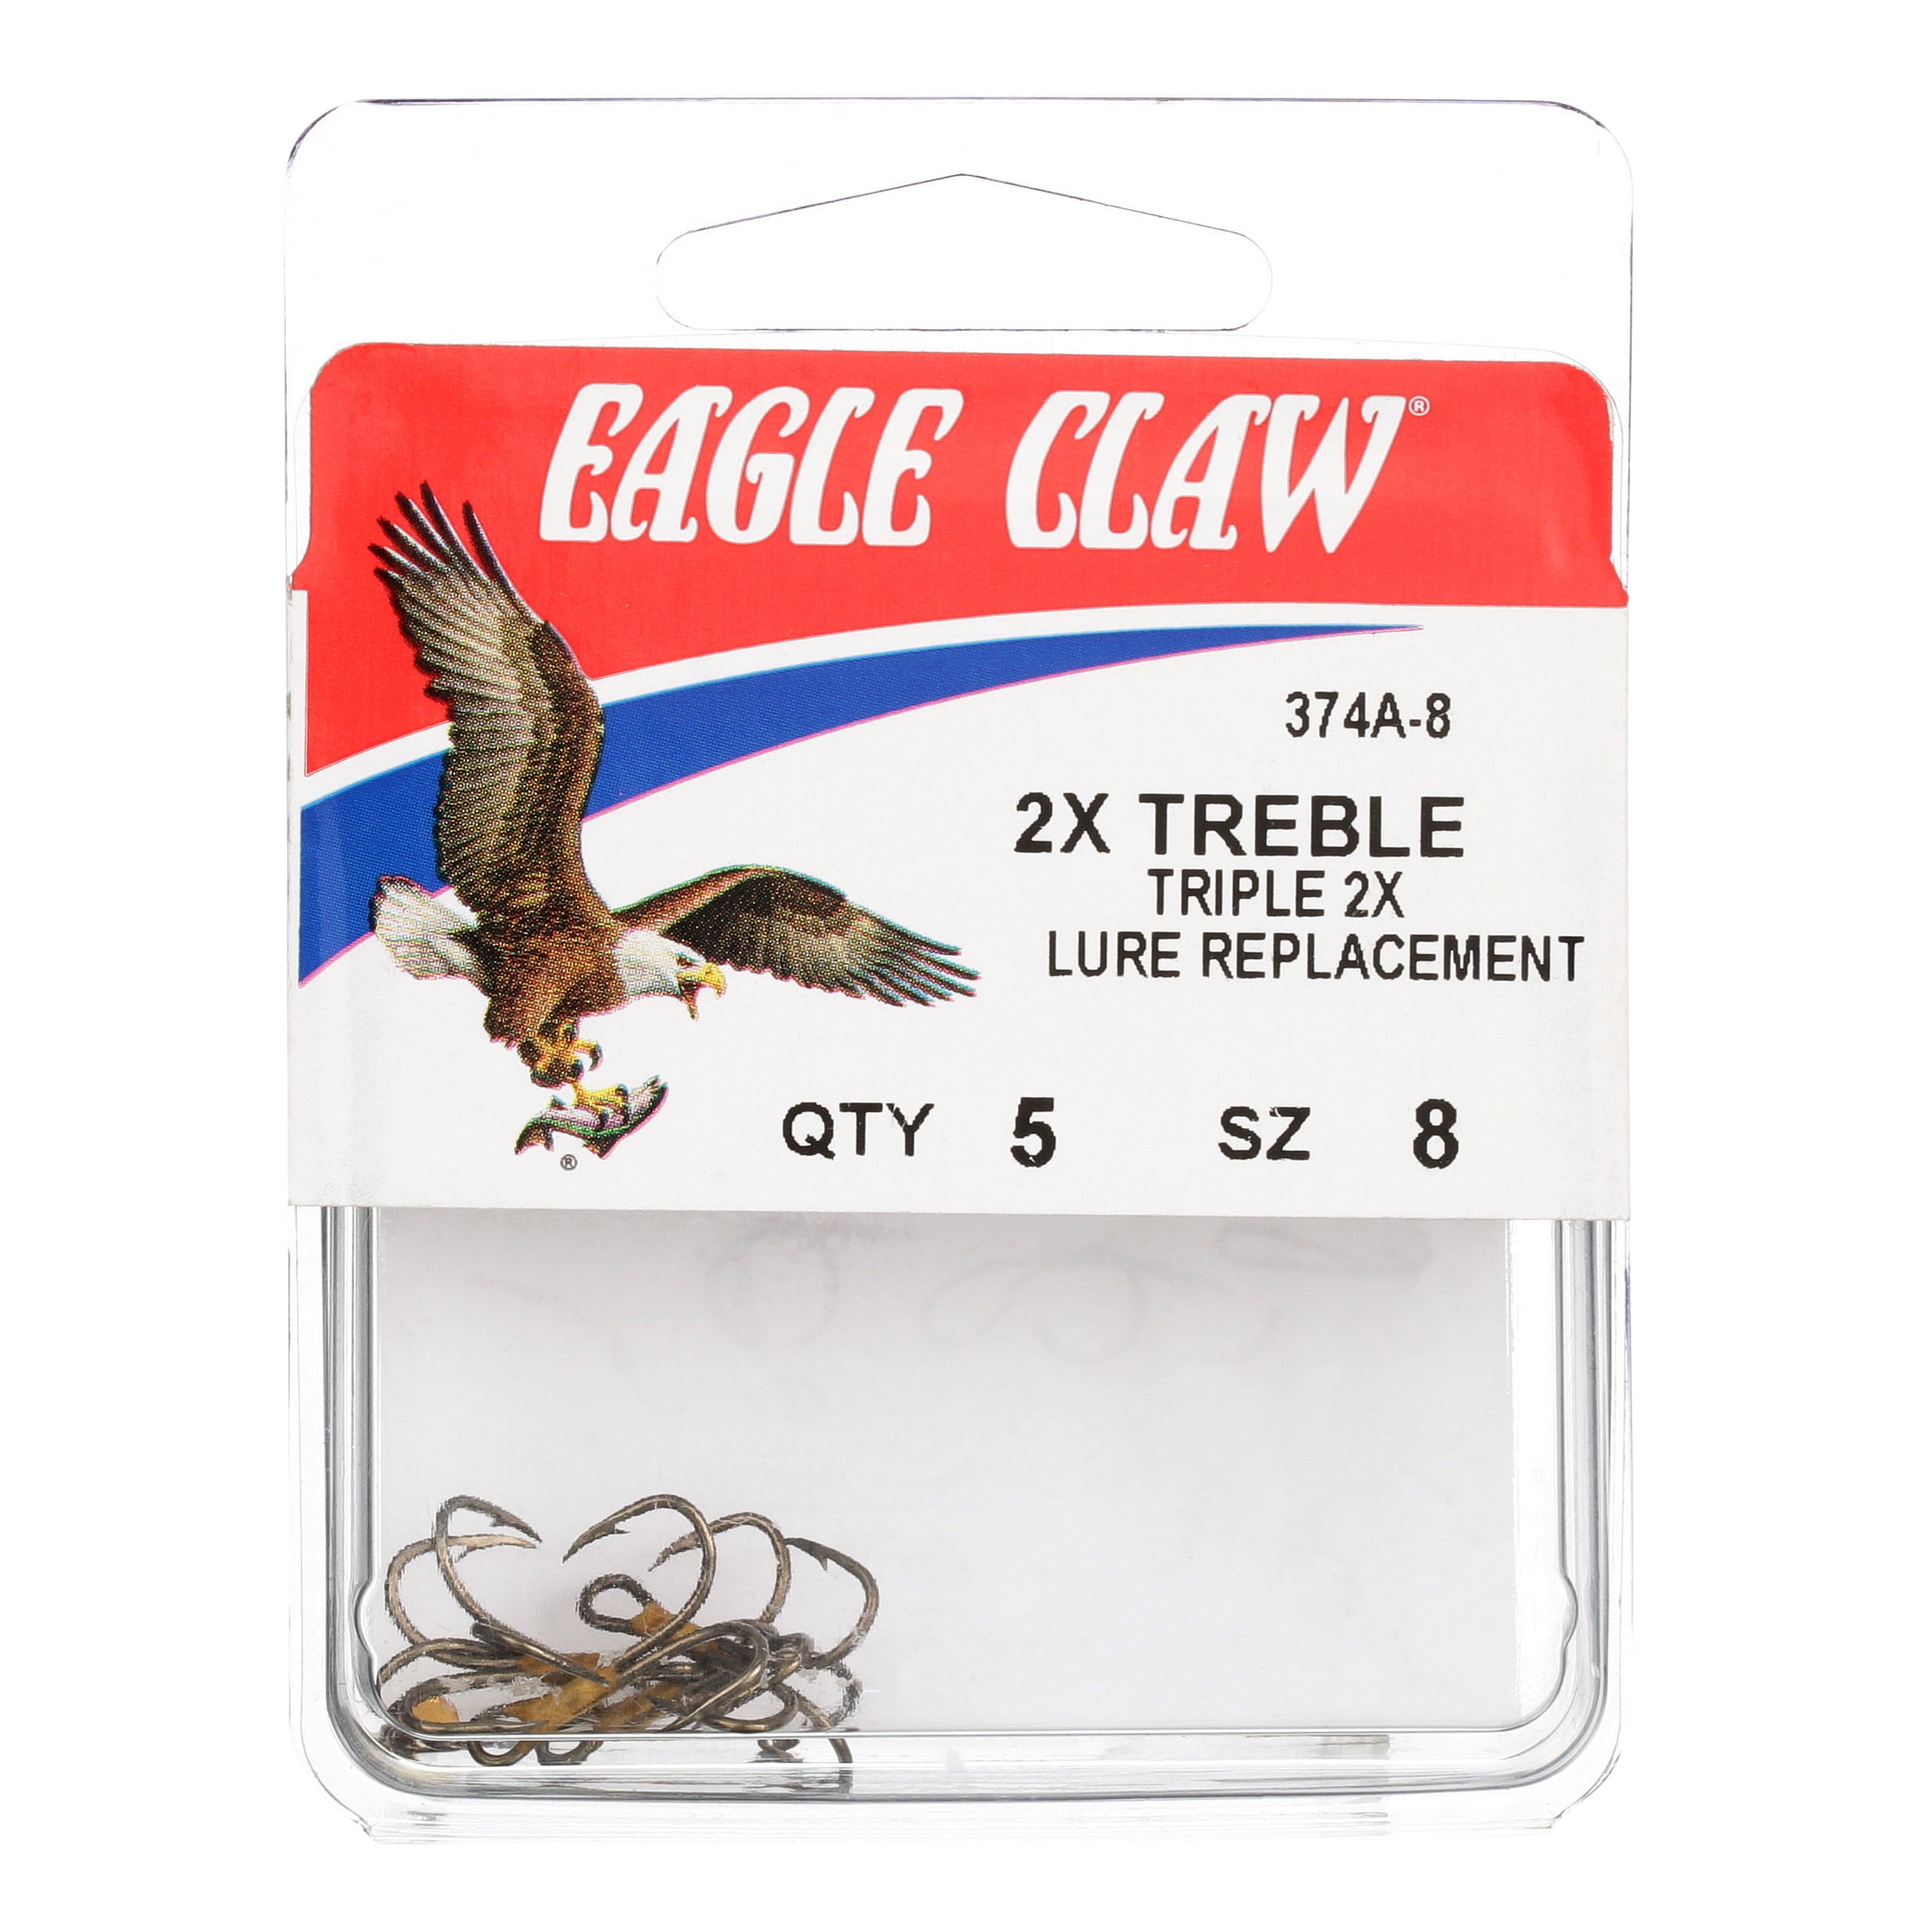 Eagle Claw 2X Treble Regular Shank Curved Point Hook 